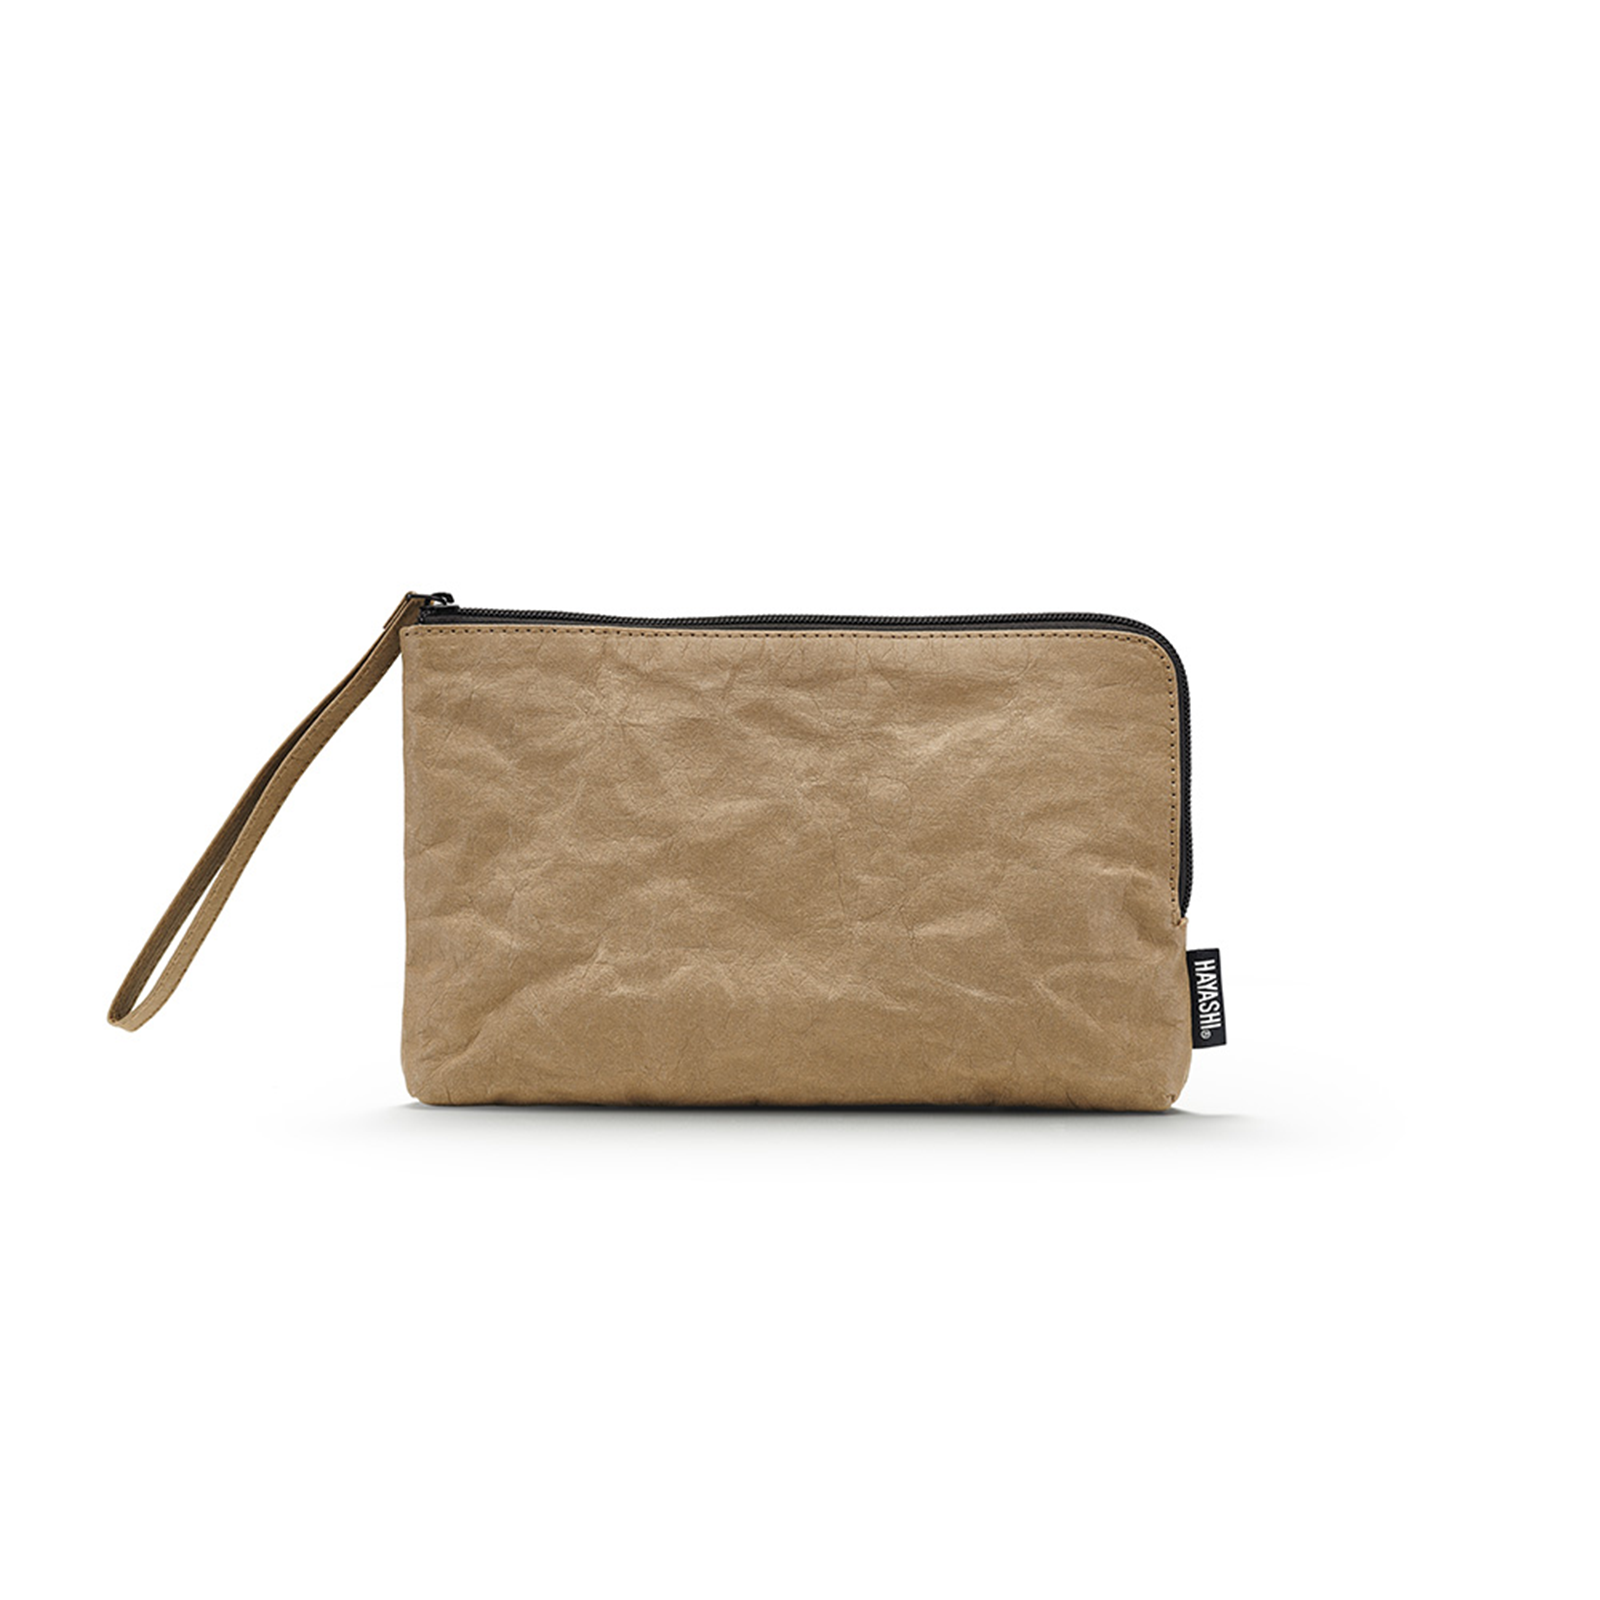 Vegan Paper Leather Tidy Pouch in Tan Colour